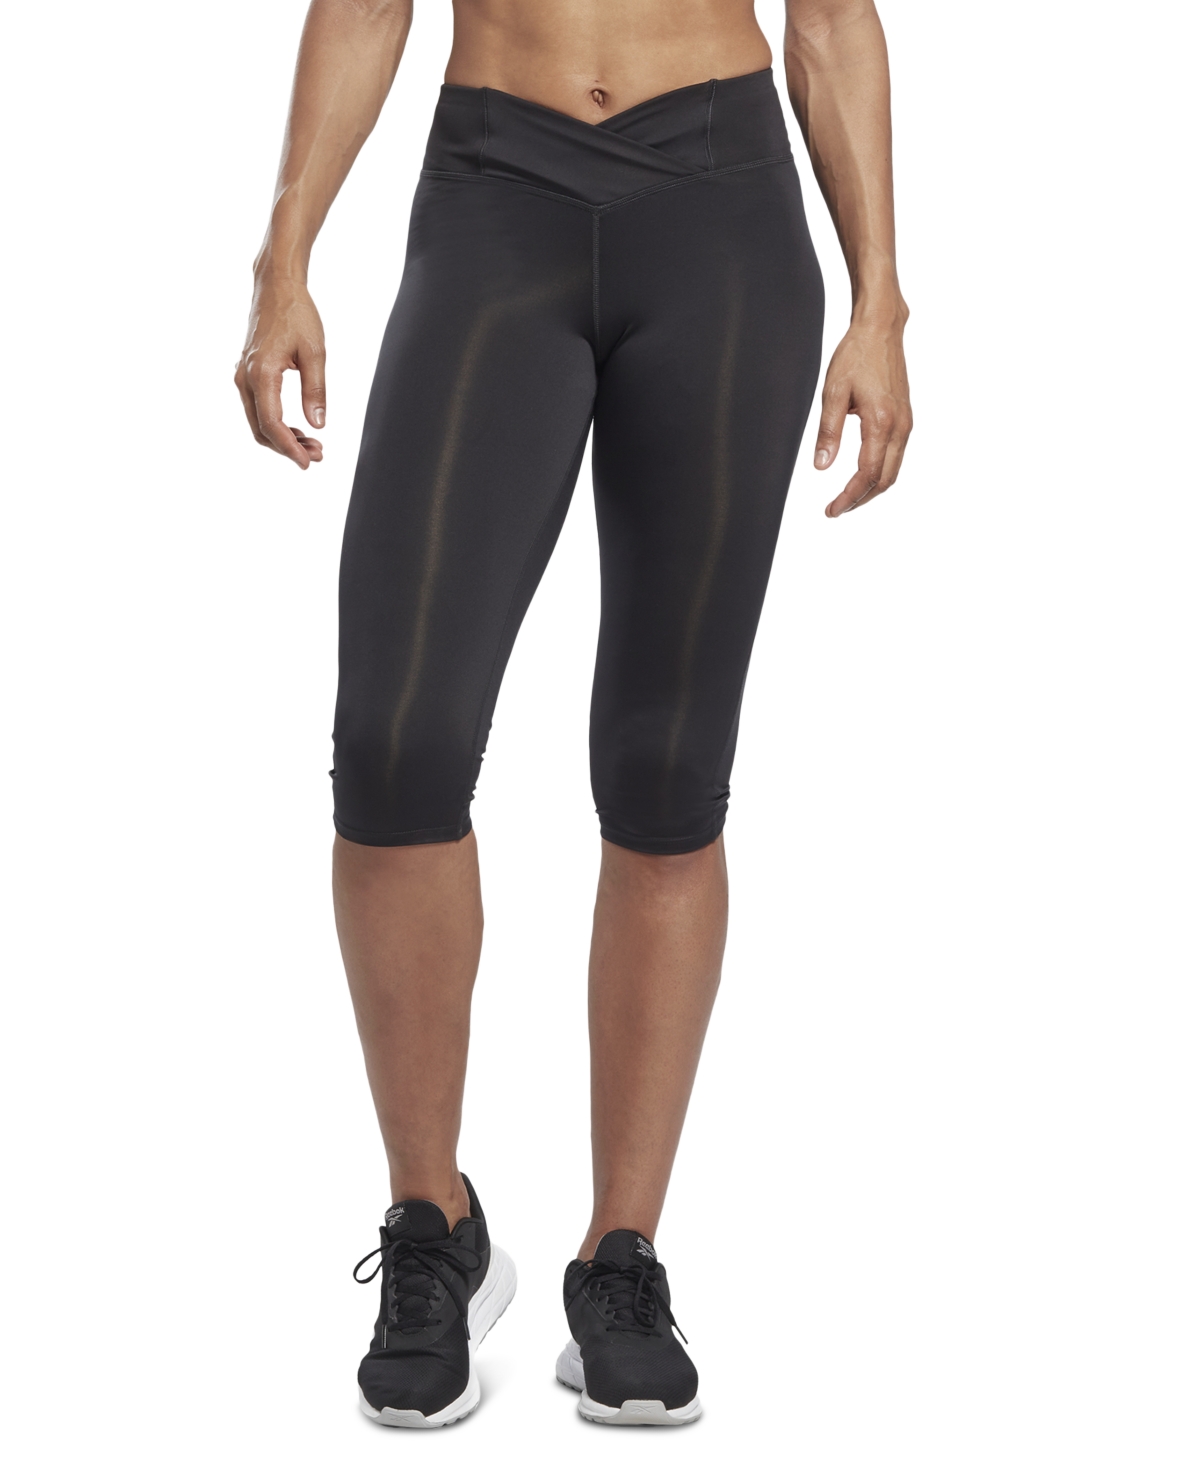 Workout Ready Compression Tights in night black